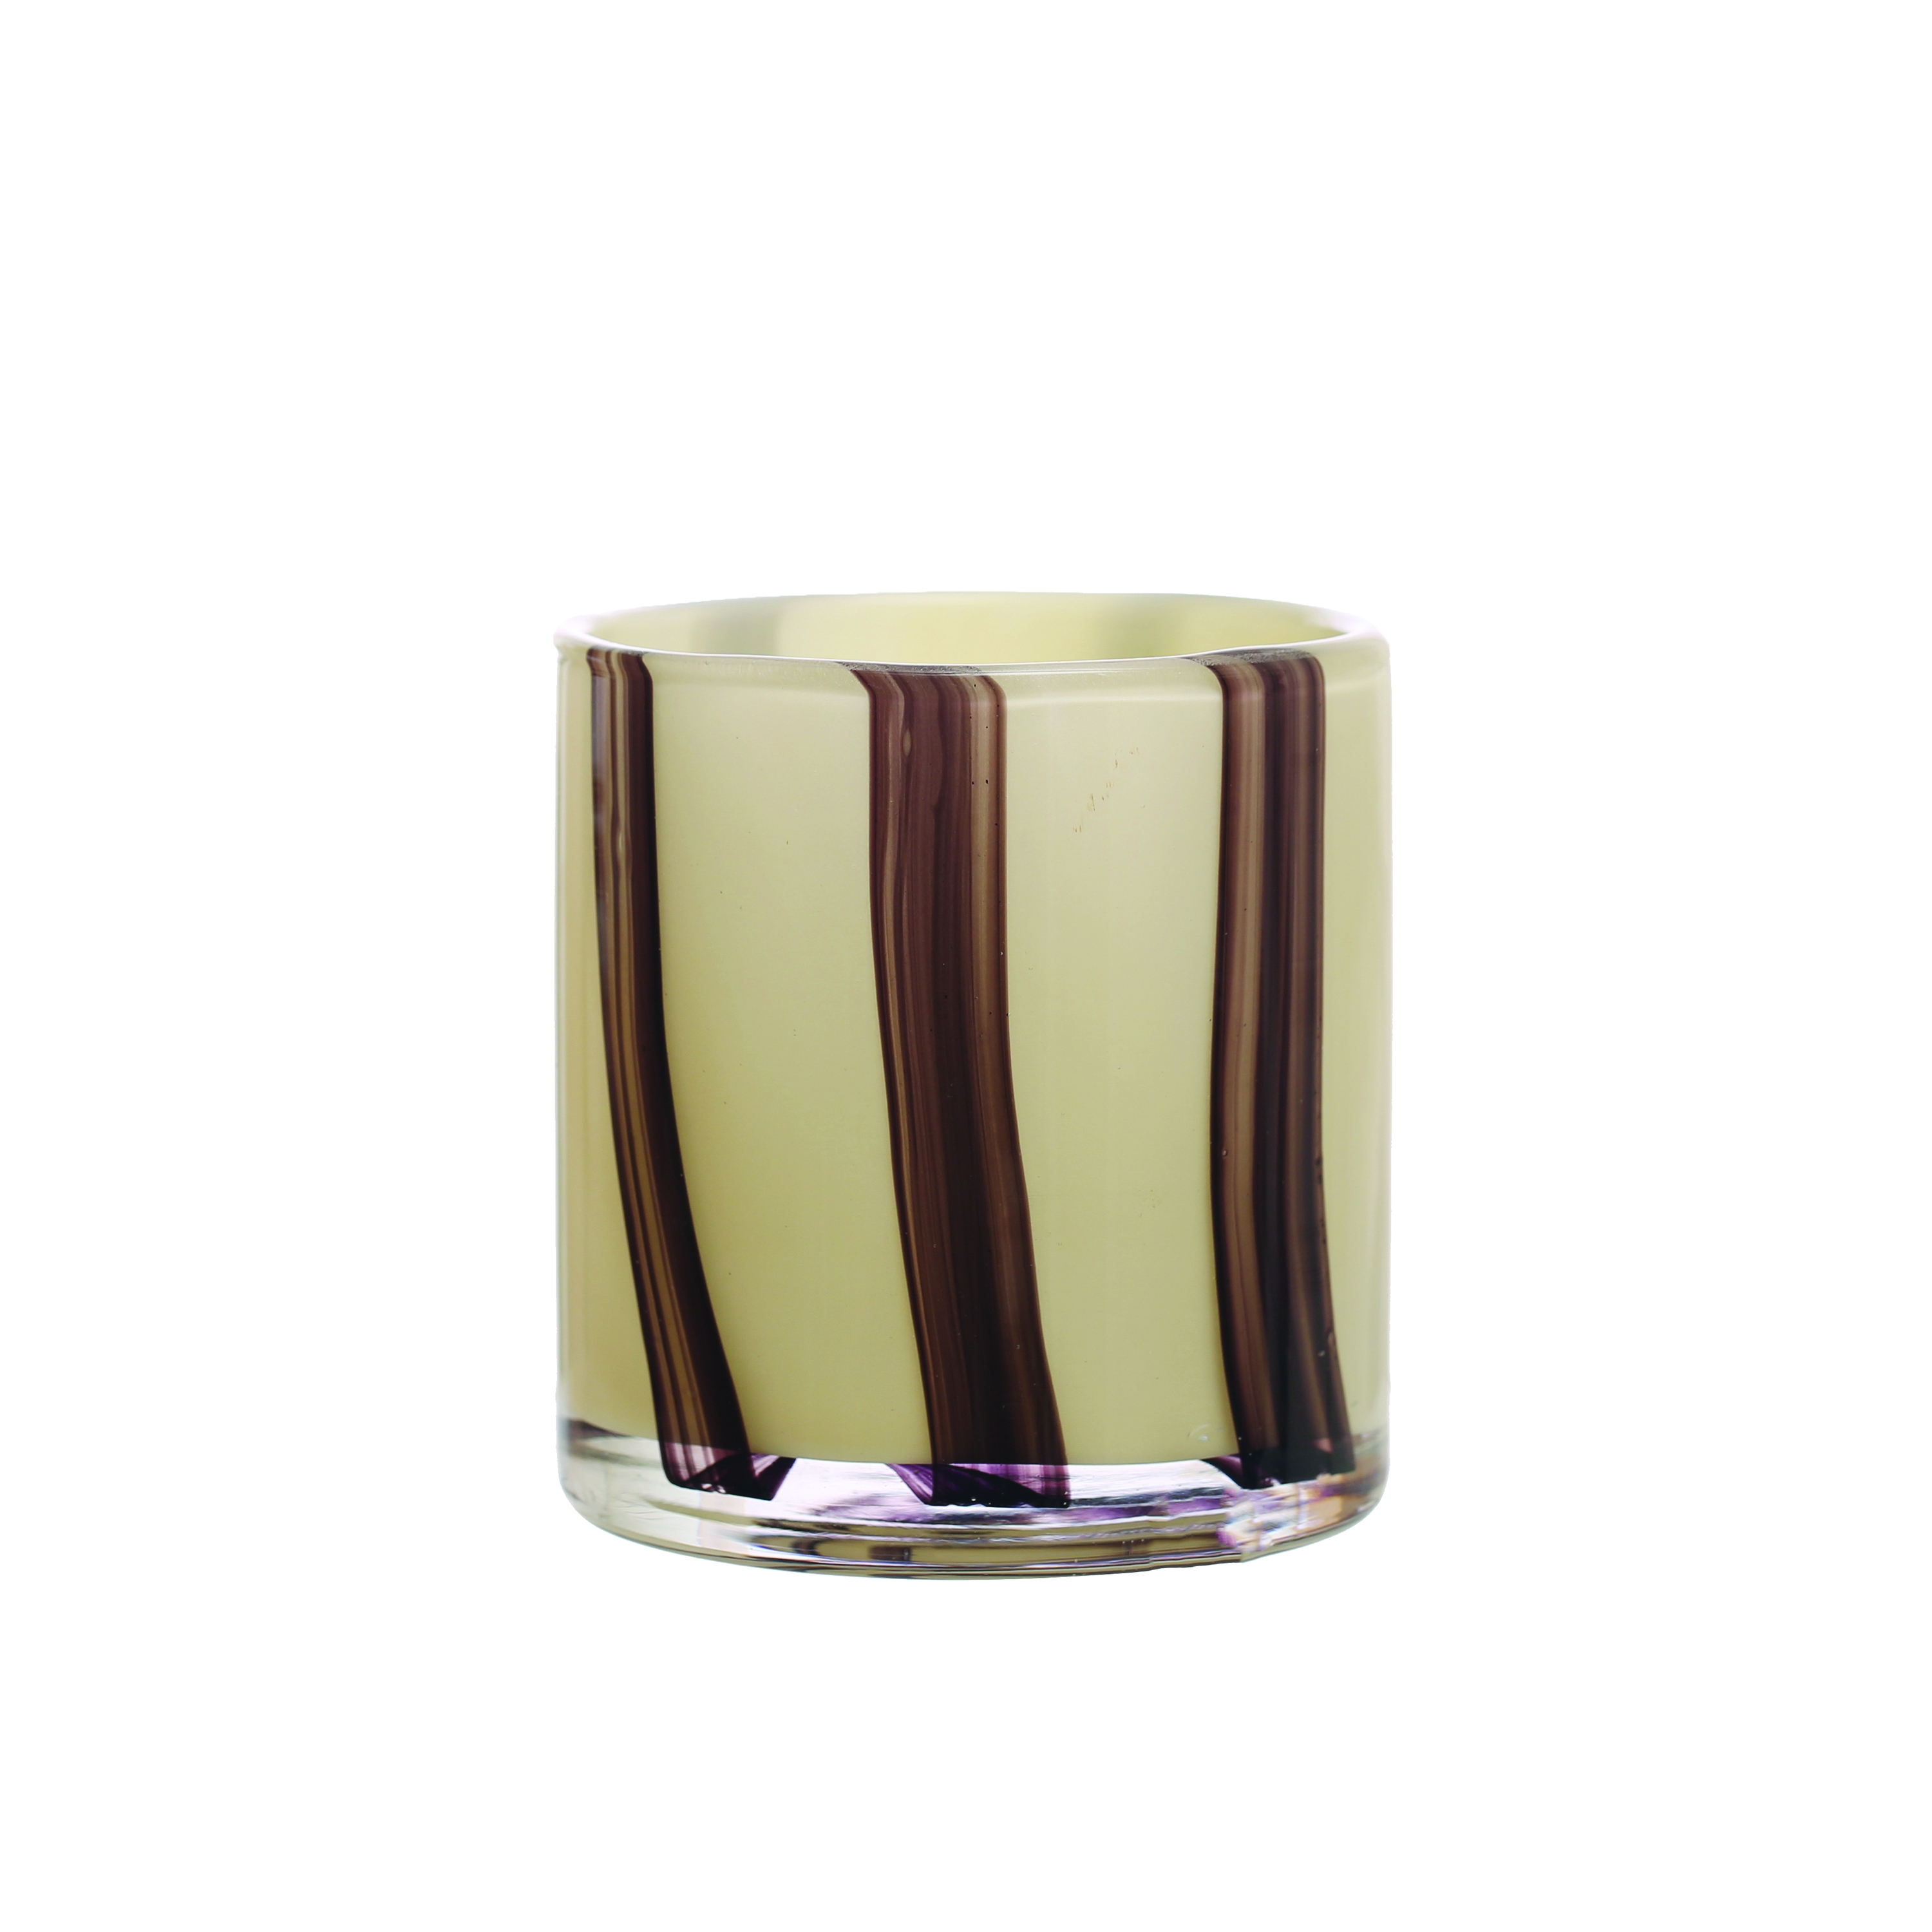 Round Glass Candle Holder/Vase with Stripes, Cream and Purple - Image 0